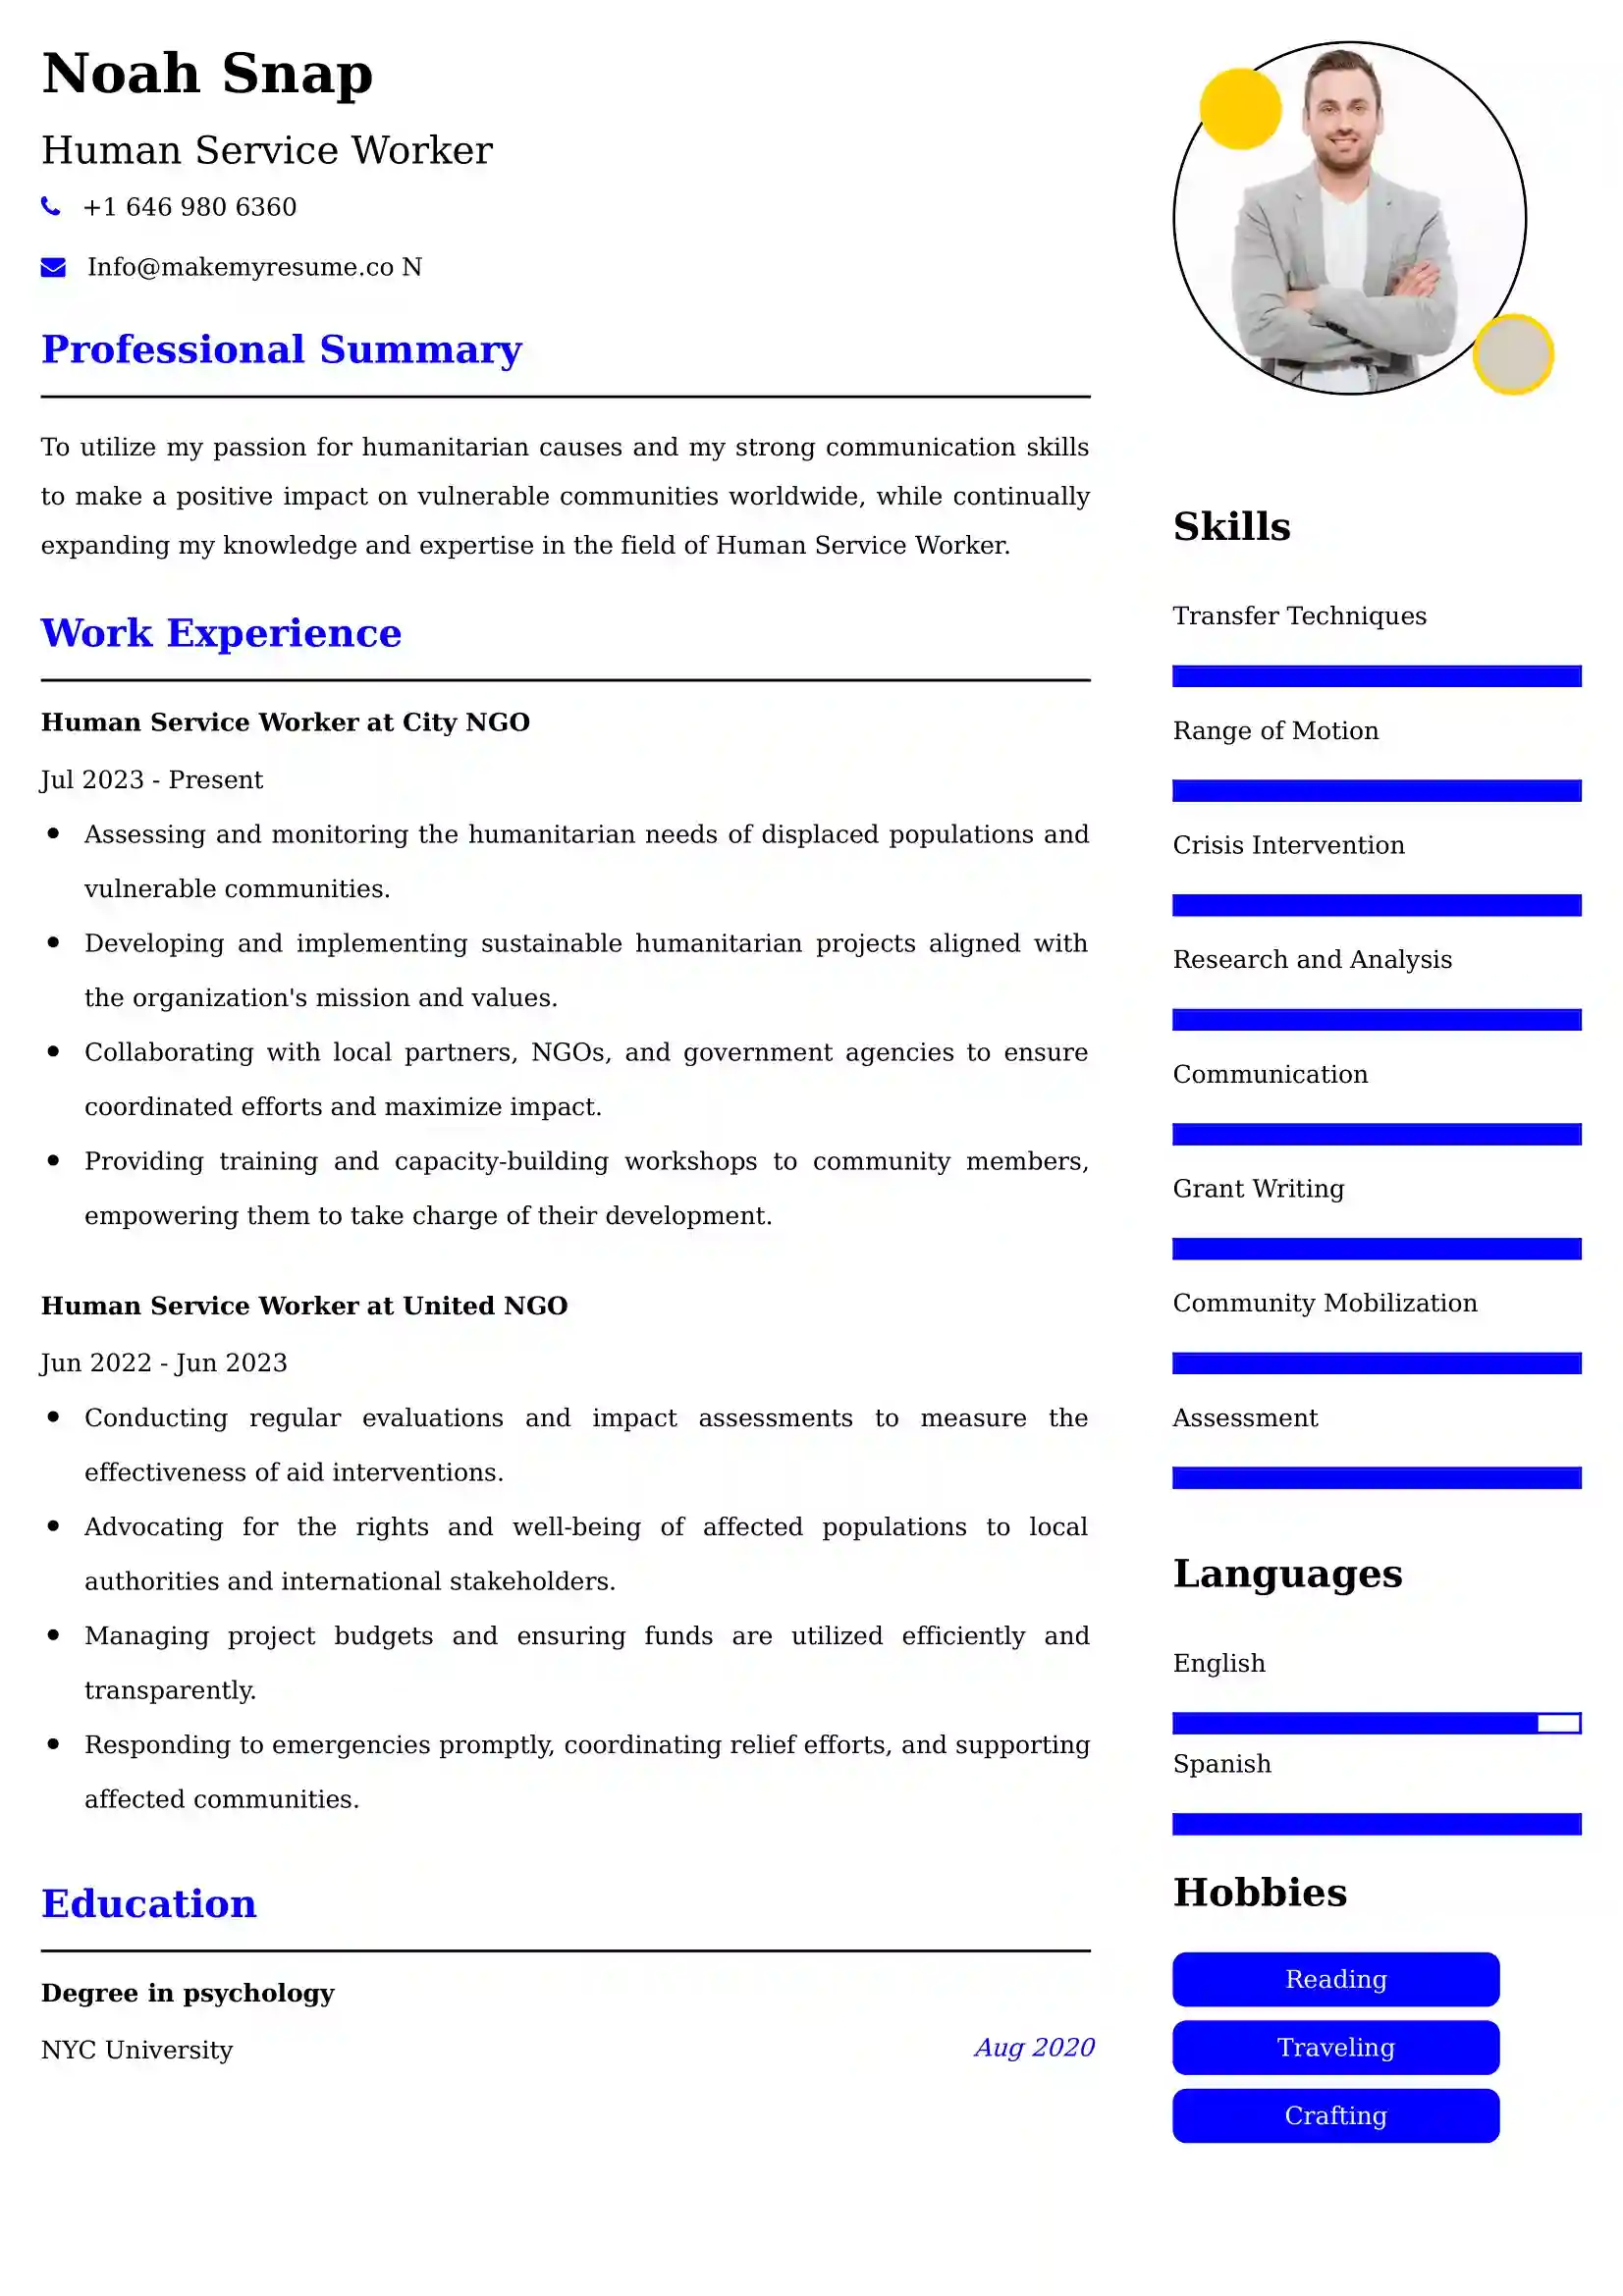 Human Service Worker Resume Examples India